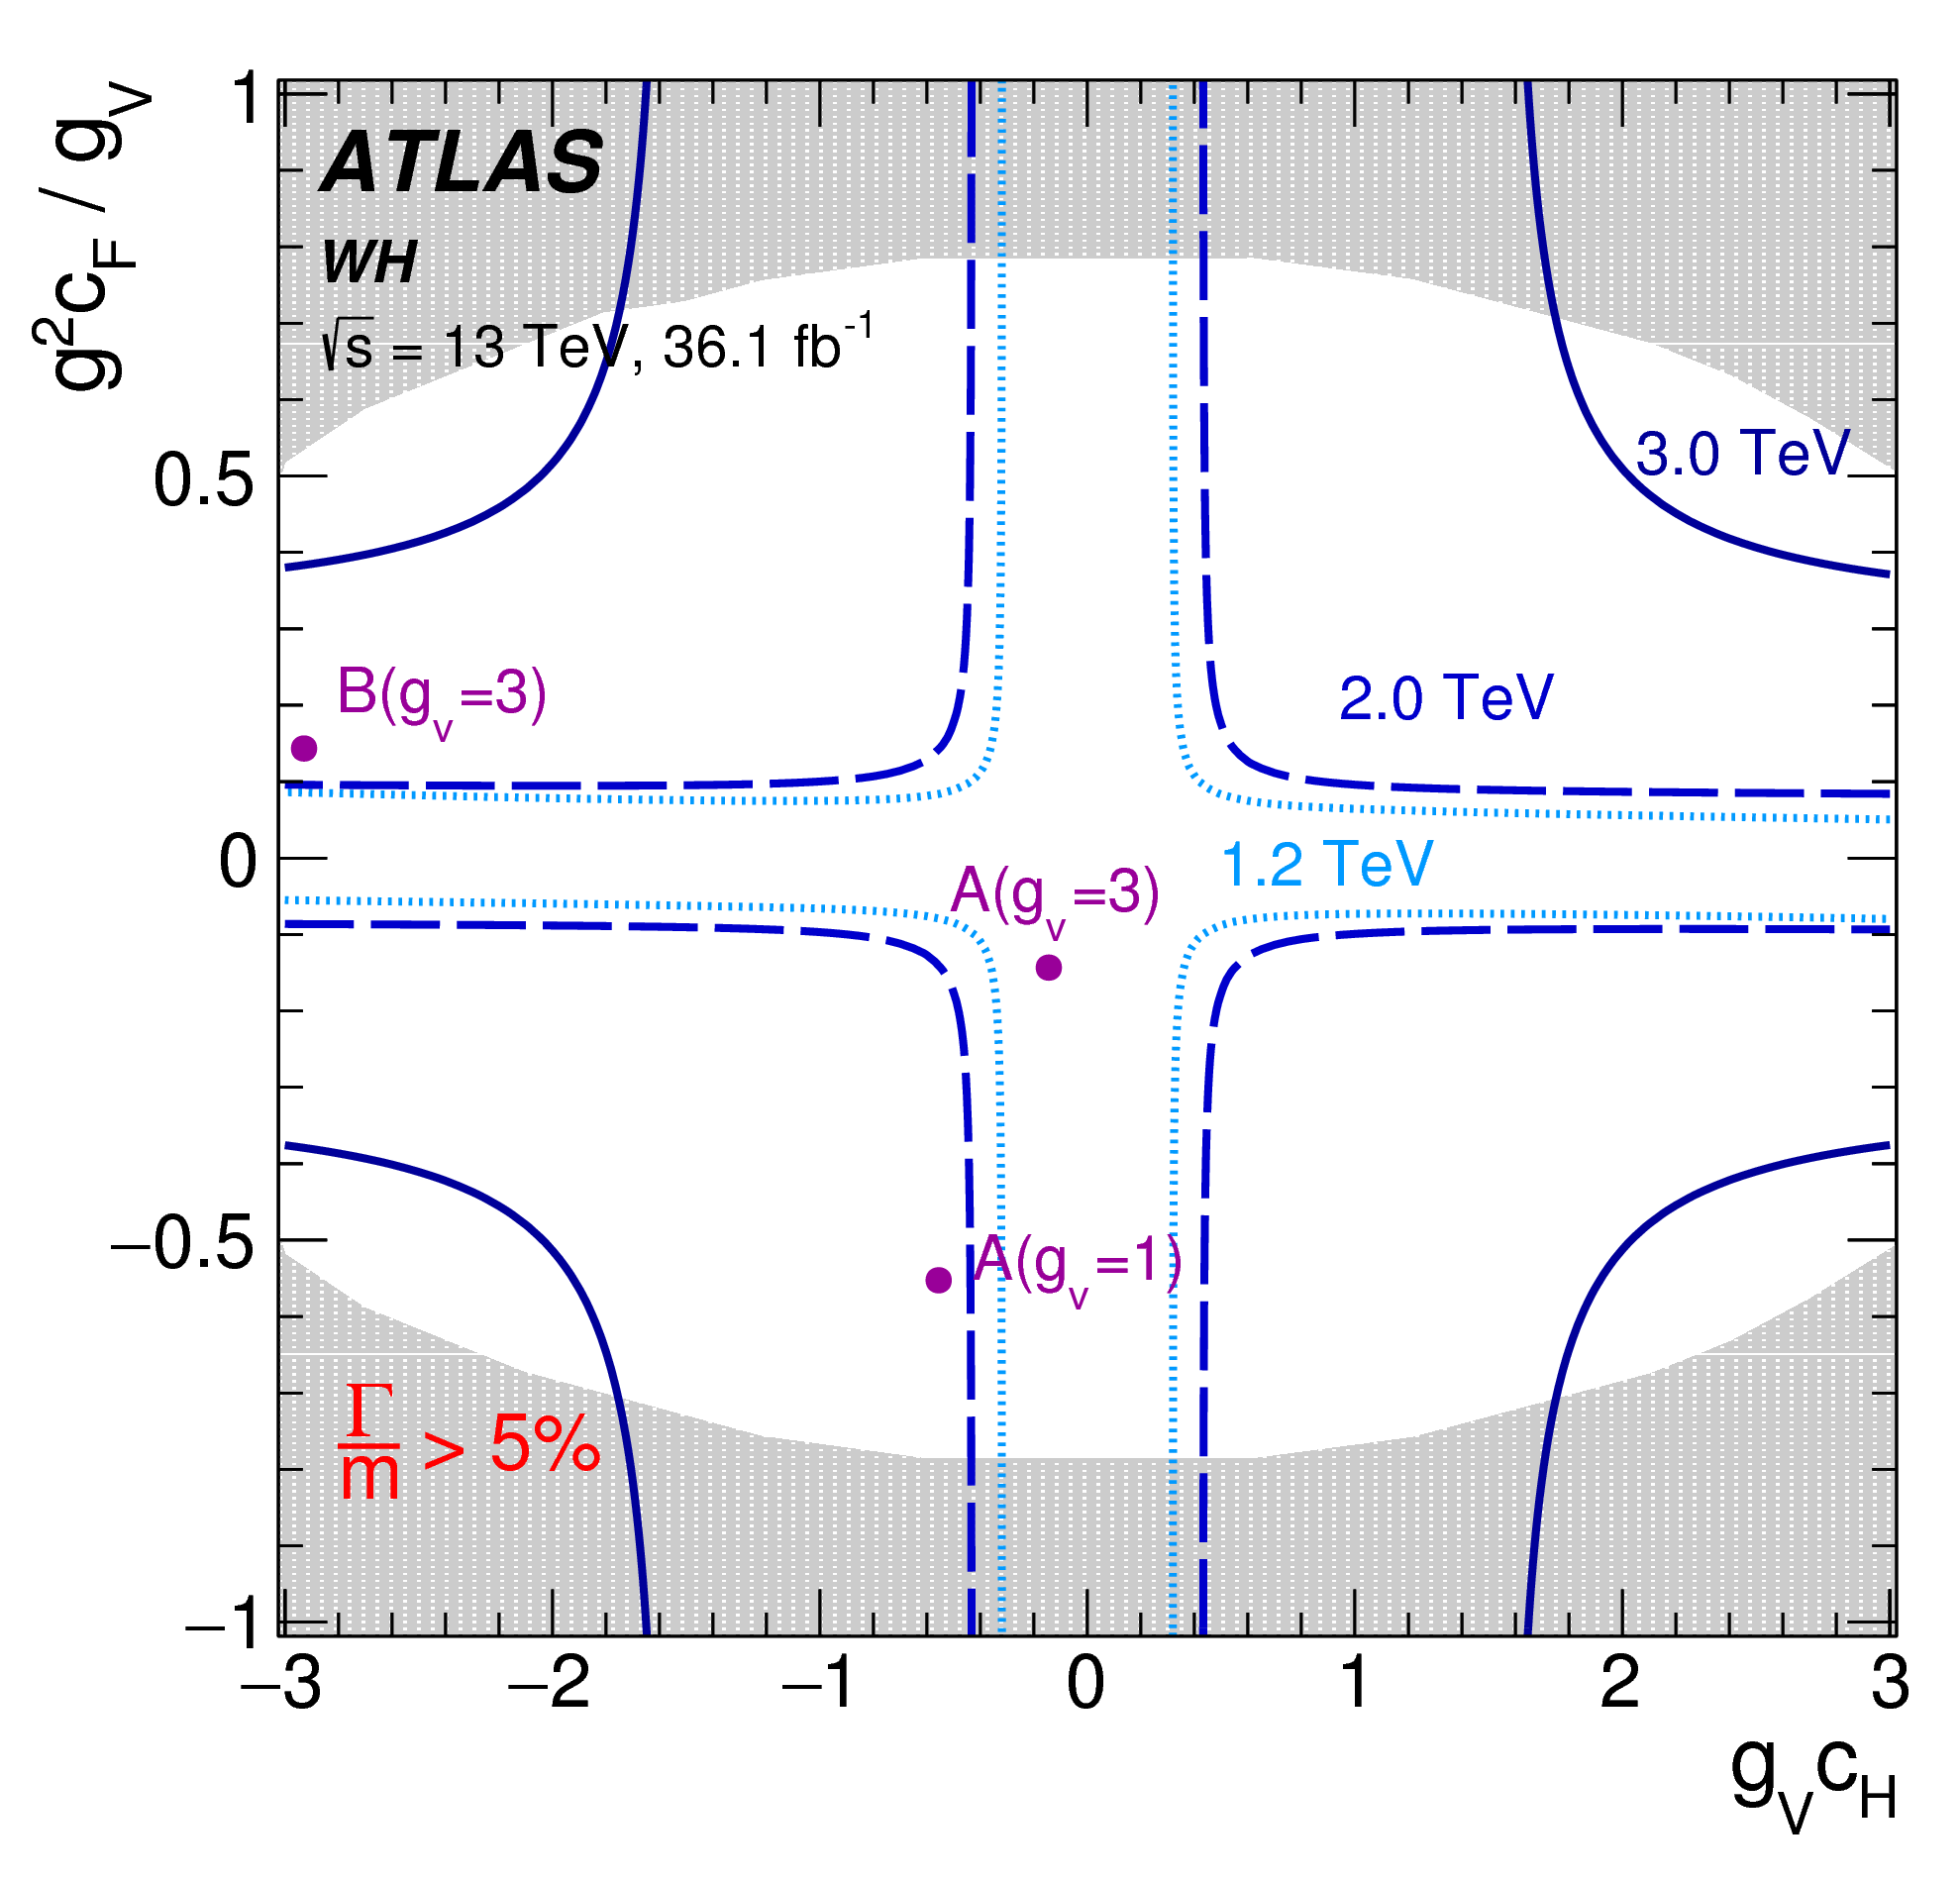 Search for heavy resonances decaying to a W or Z boson and a Higgs boson in the qqbb final state in pp collisions at sqrt(s)=13 TeV with the ATLAS detector